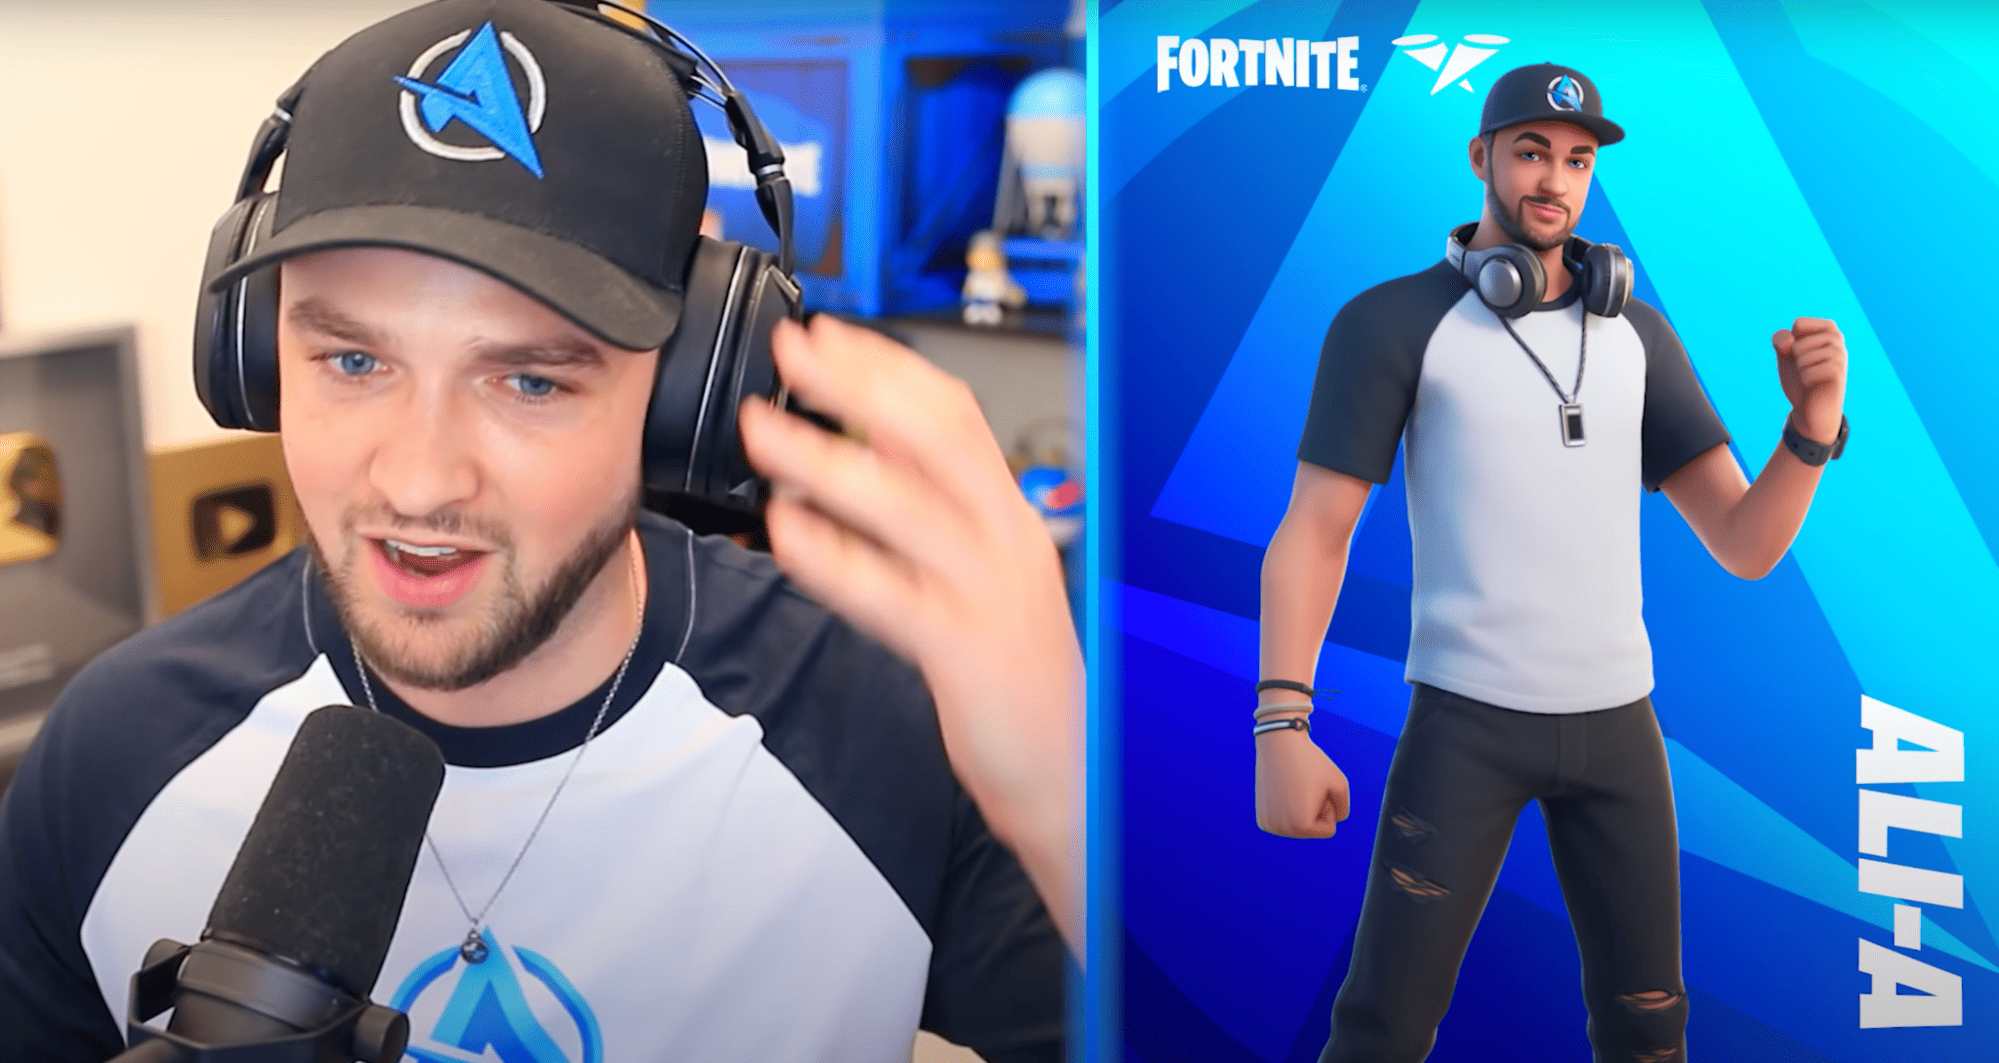 Top Gaming Influencers Fortnite